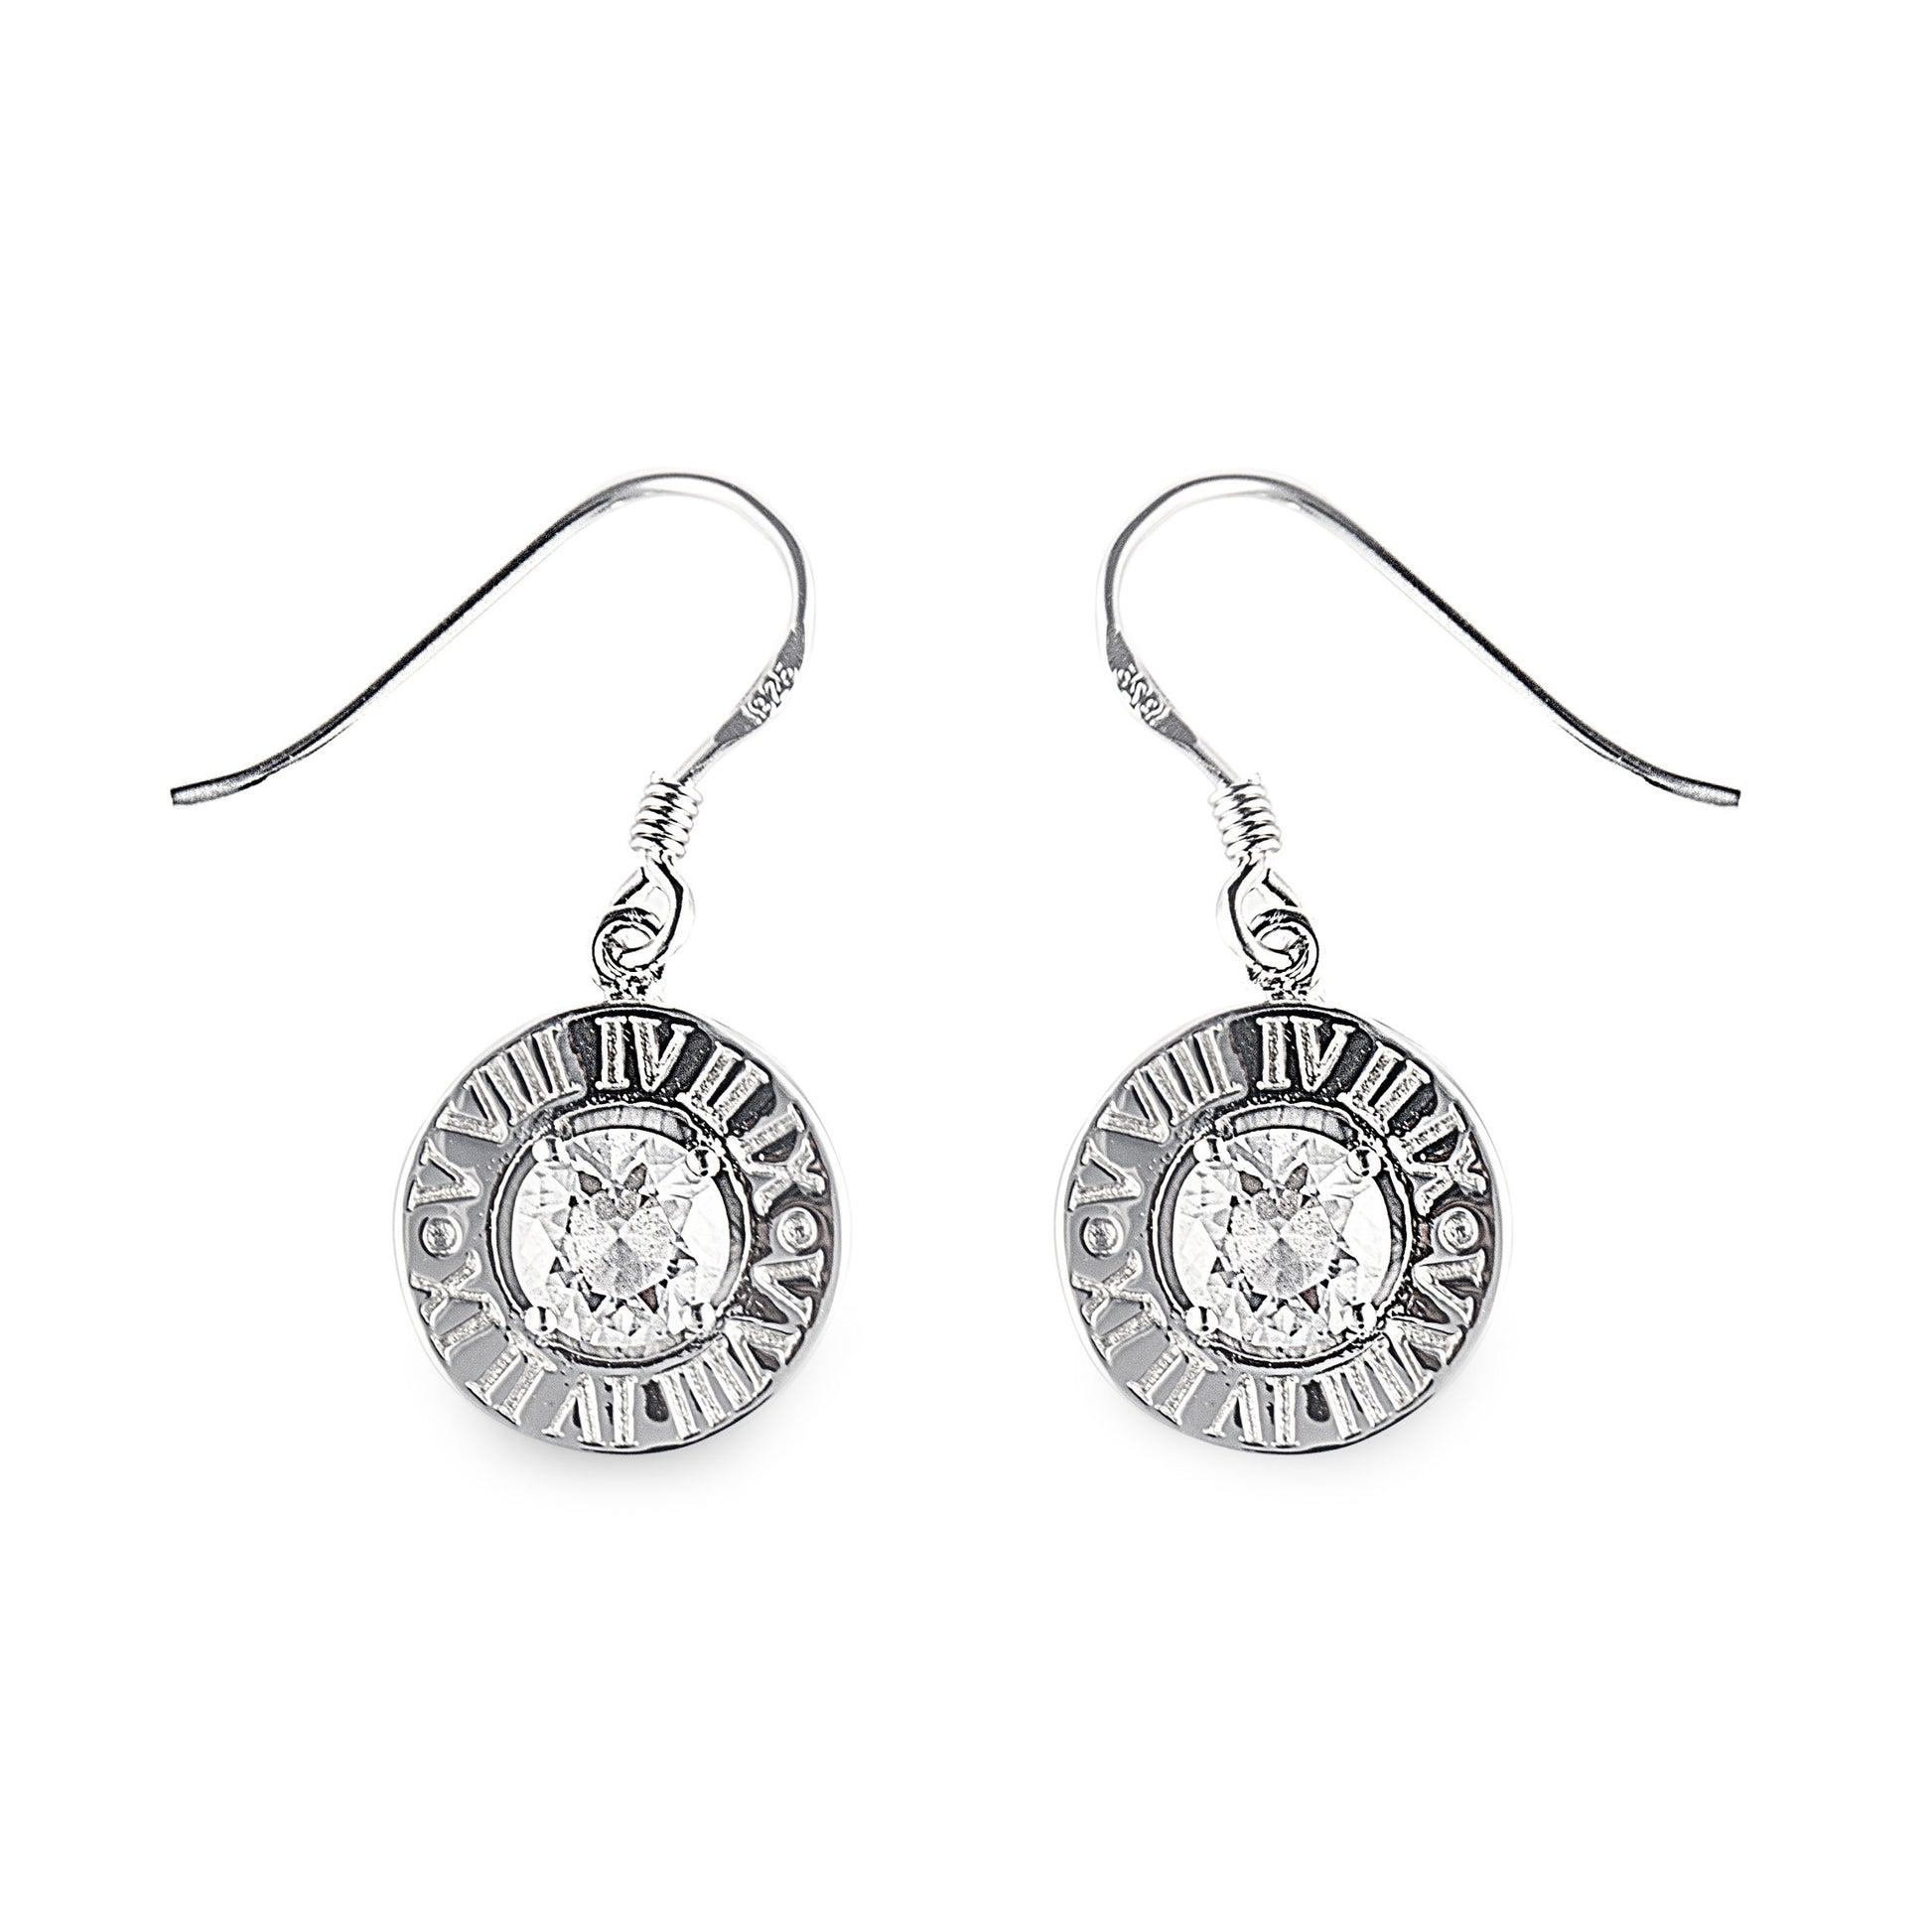 Eden Stone Drop Earrings in 925 sterling silver with stunning 2-carat cubic zirconia stone surrounded by Roman Numerals. Matching rings and necklaces are available. Affordable luxury jewellery by Bellagio & Co. Worldwide shipping from Australia.